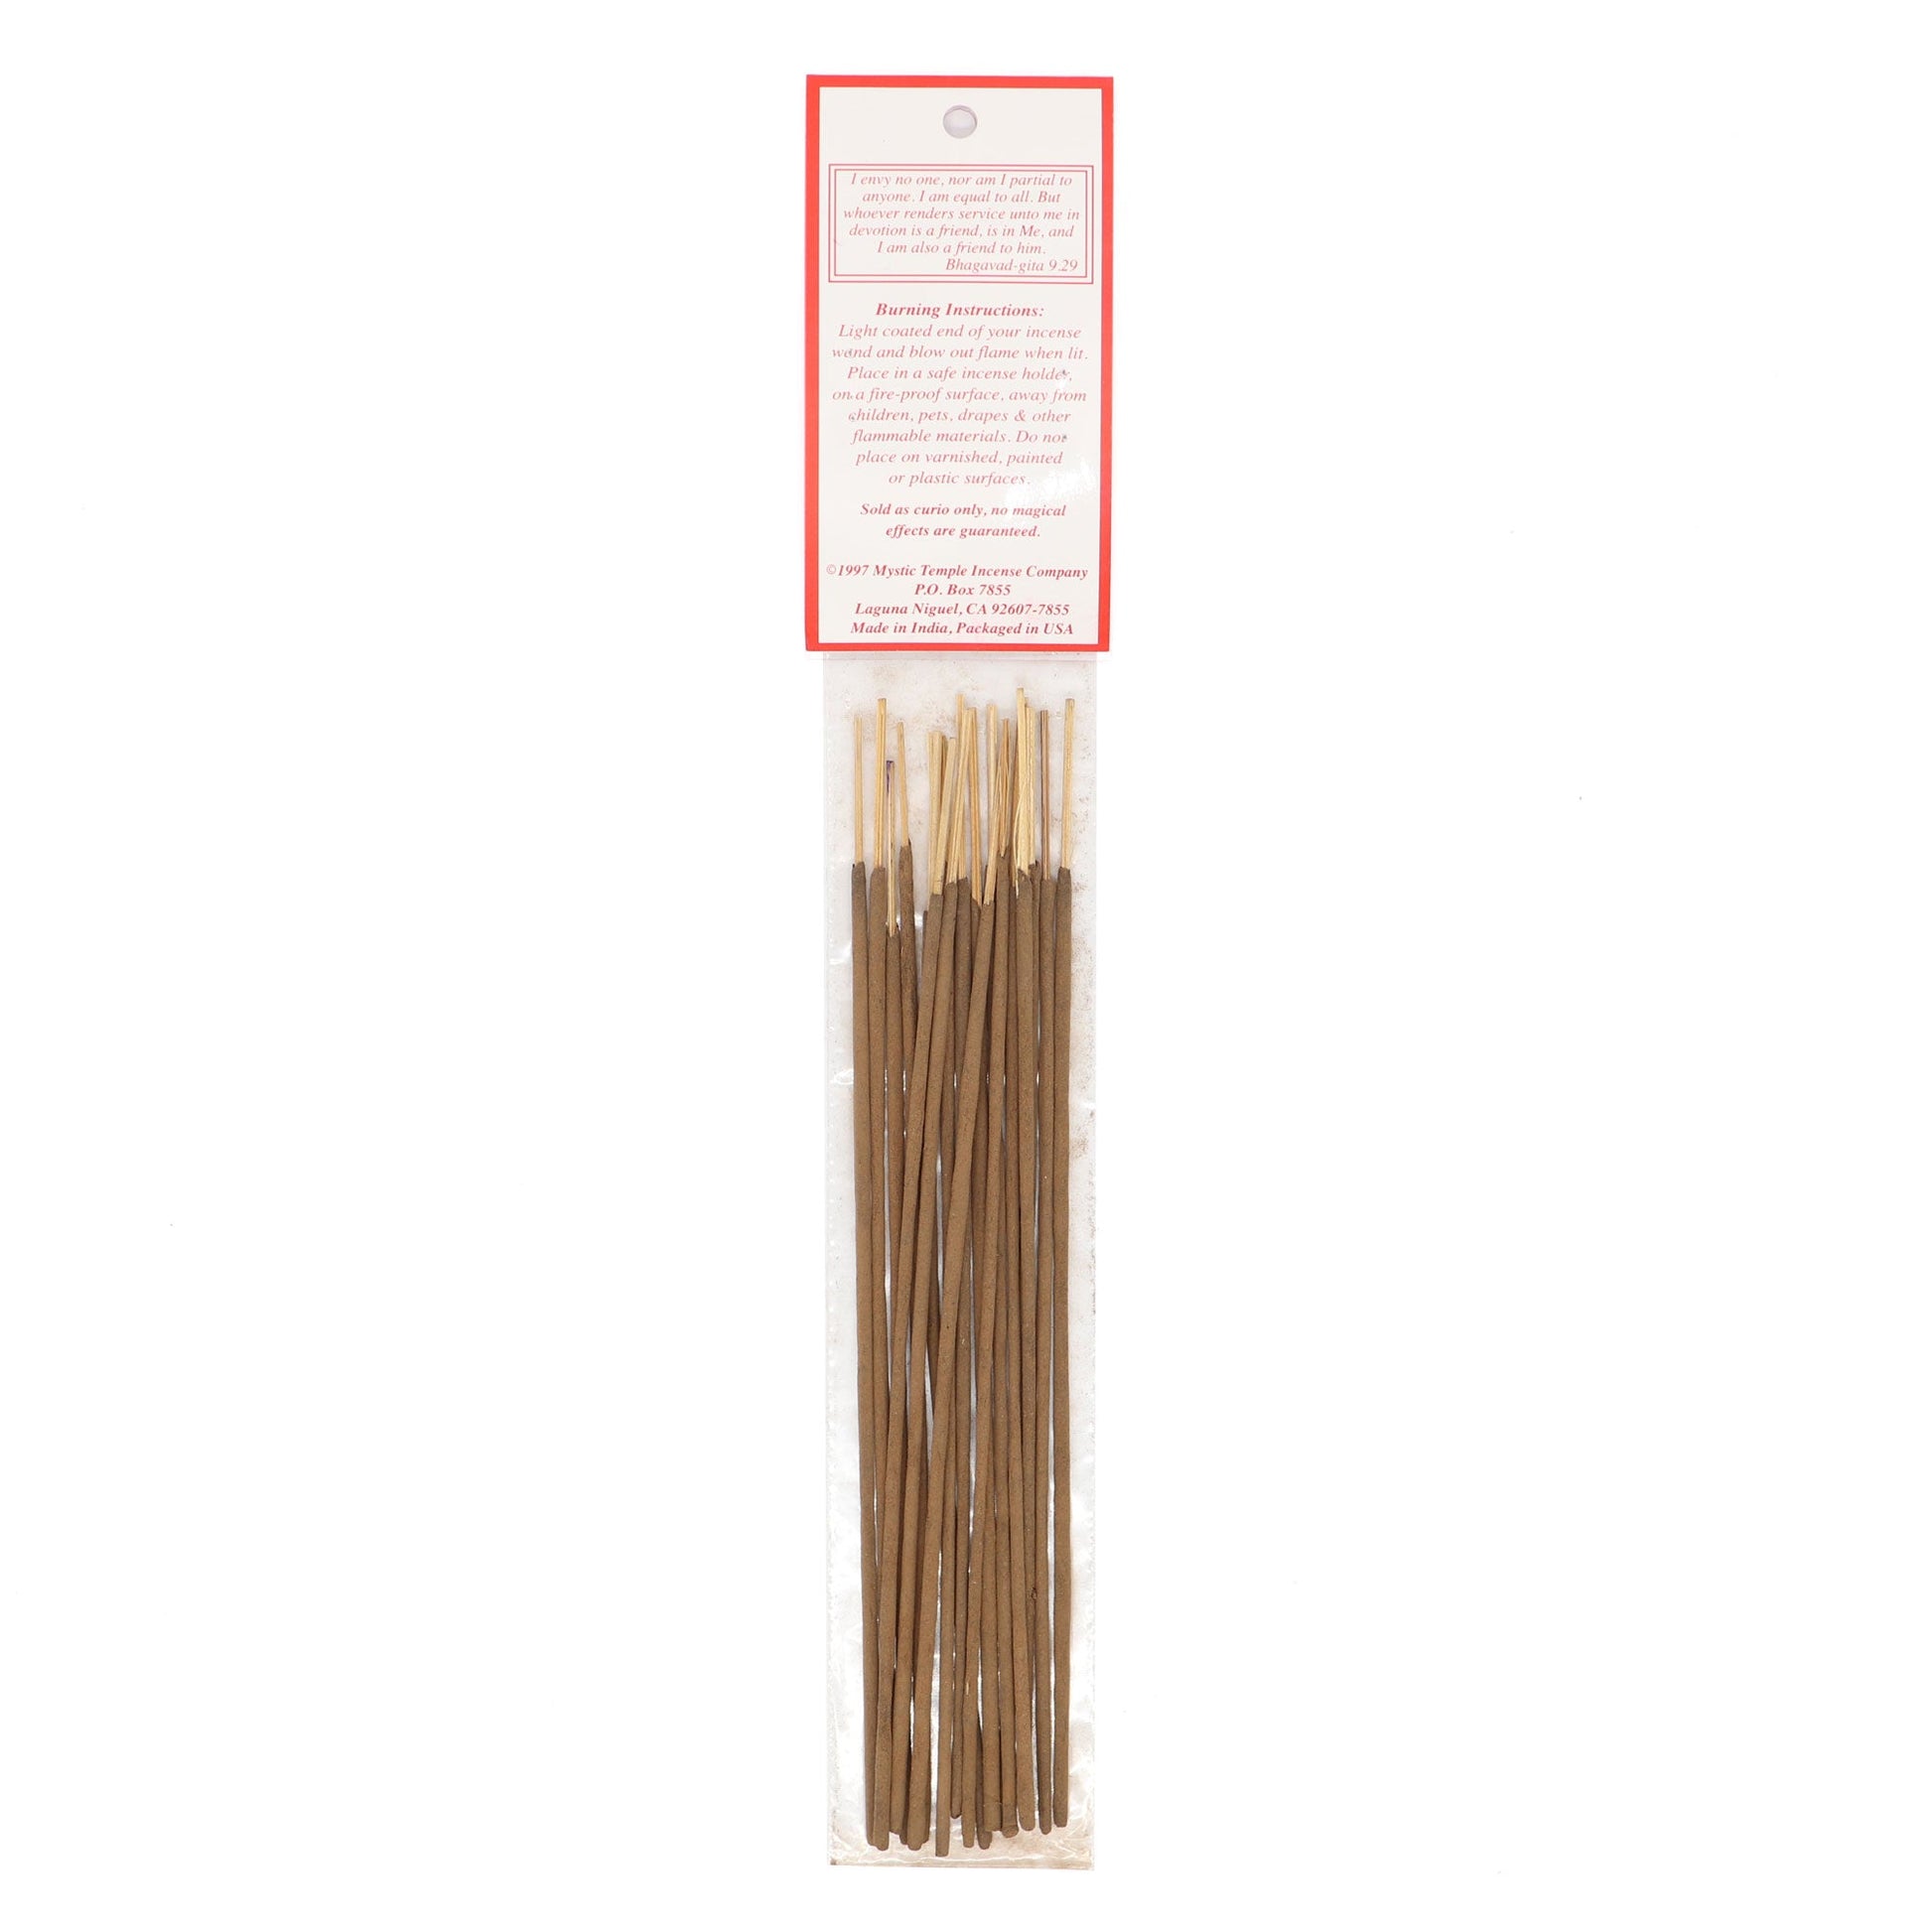 Patchouli Leaves Incense - 13 Moons